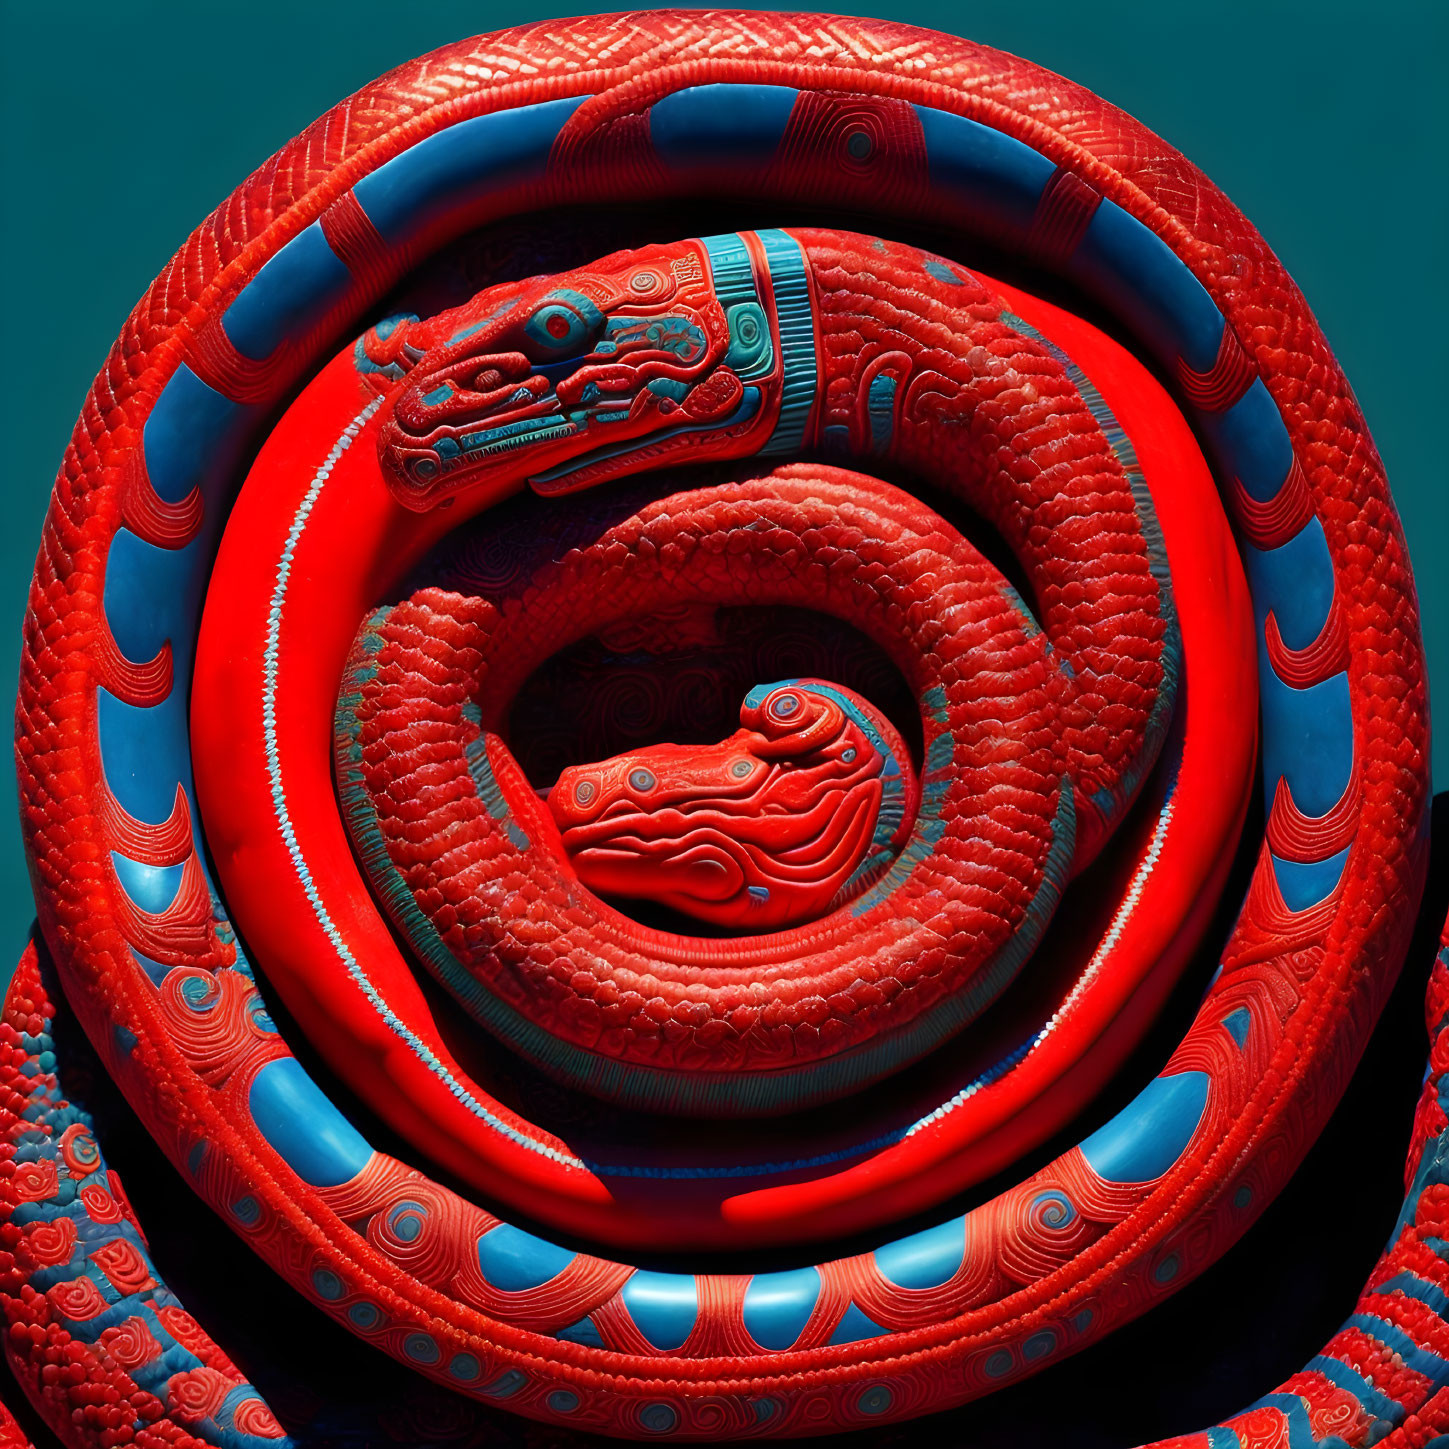 Mayan Red Self-Existing Serpent